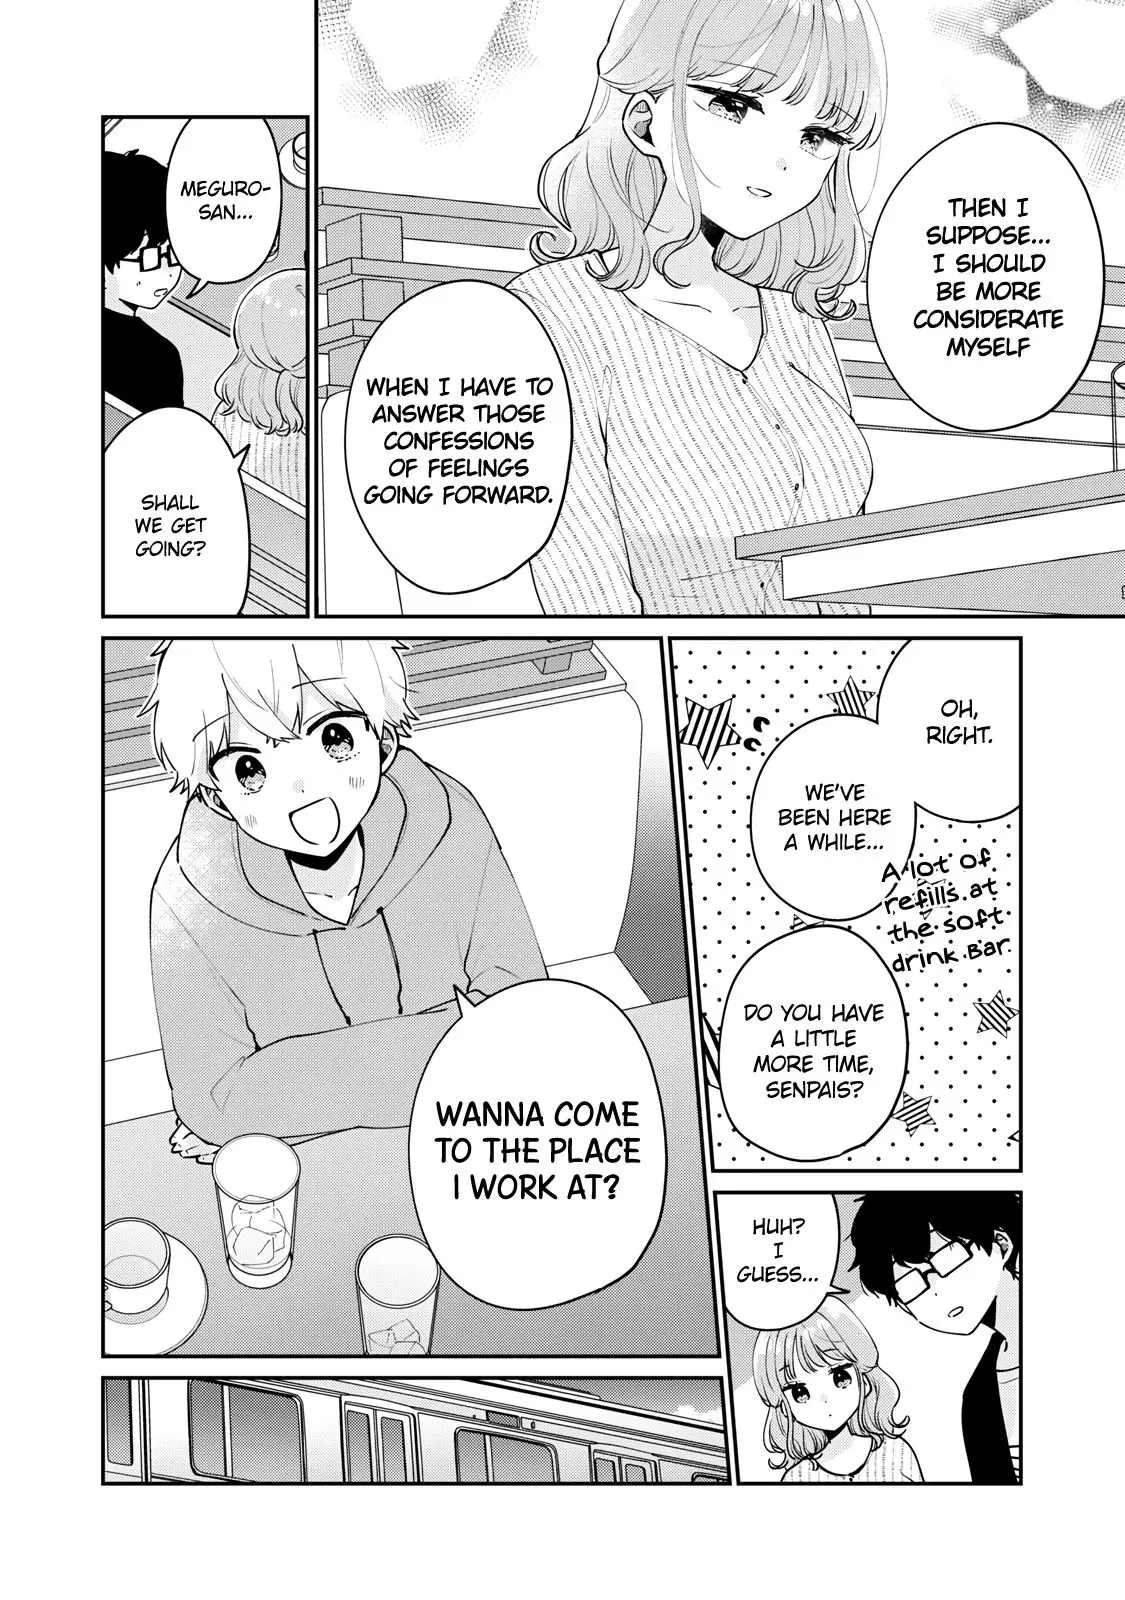 It's Not Meguro-San's First Time - 56 page 11-5f1c5f82